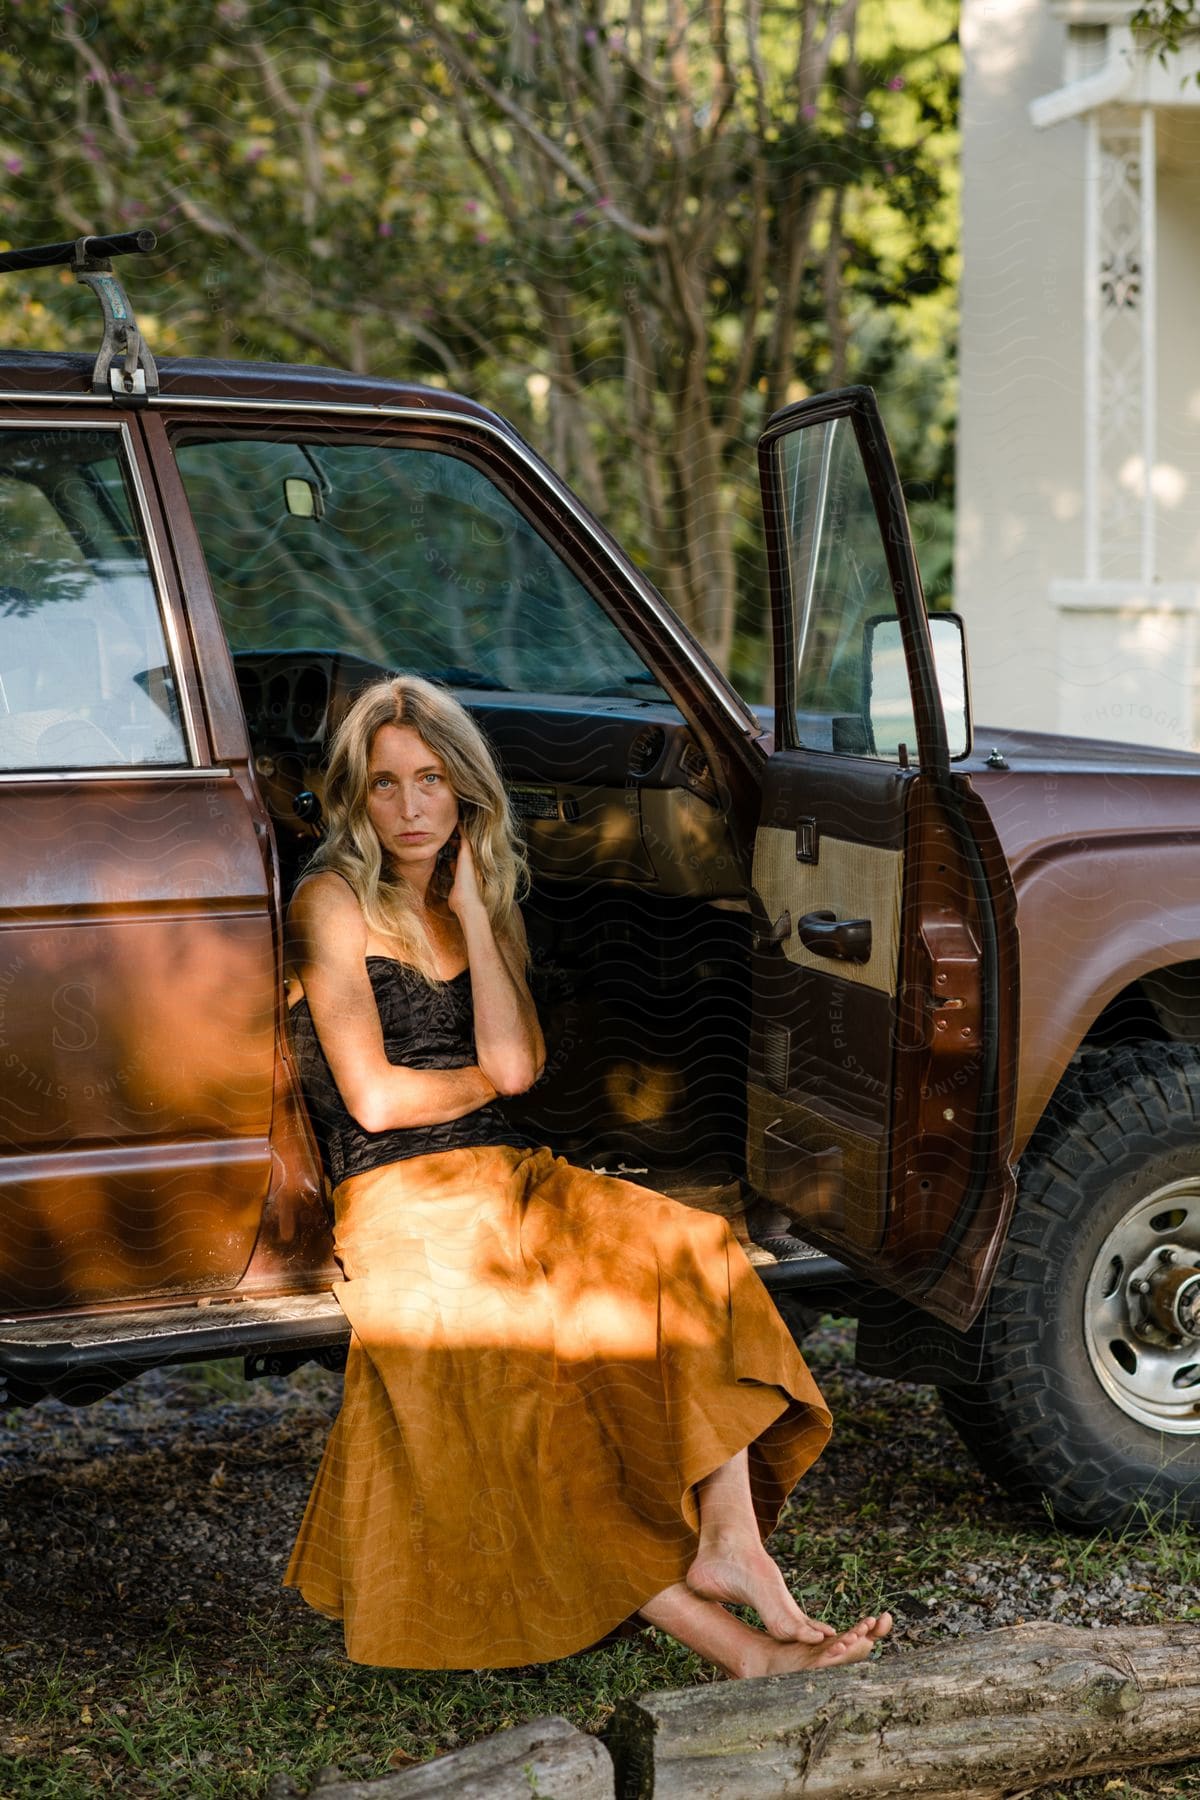 A woman with long blonde hair and wearing a long skirt is sitting inside the open door of a jeep